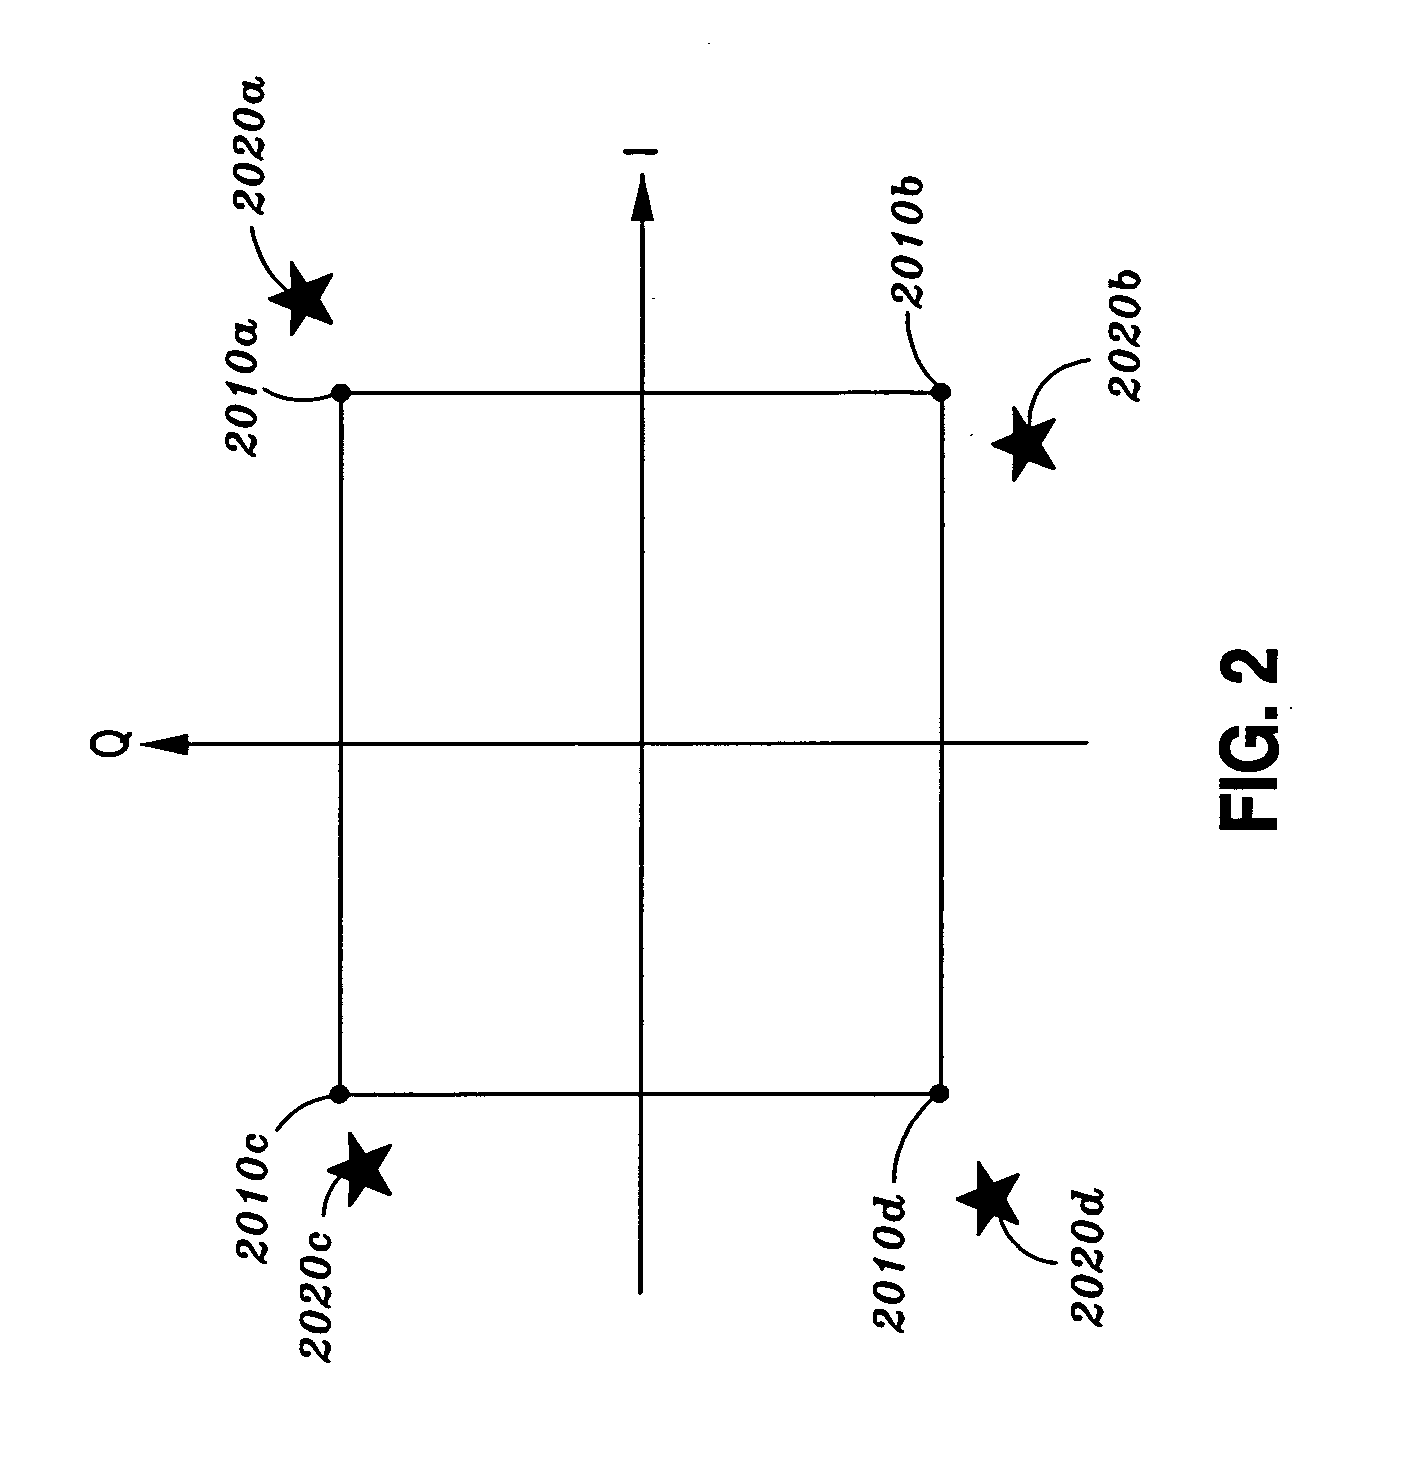 Apparatus and method for calibration of gain and/or phase imbalance and/or DC offset in a communication system